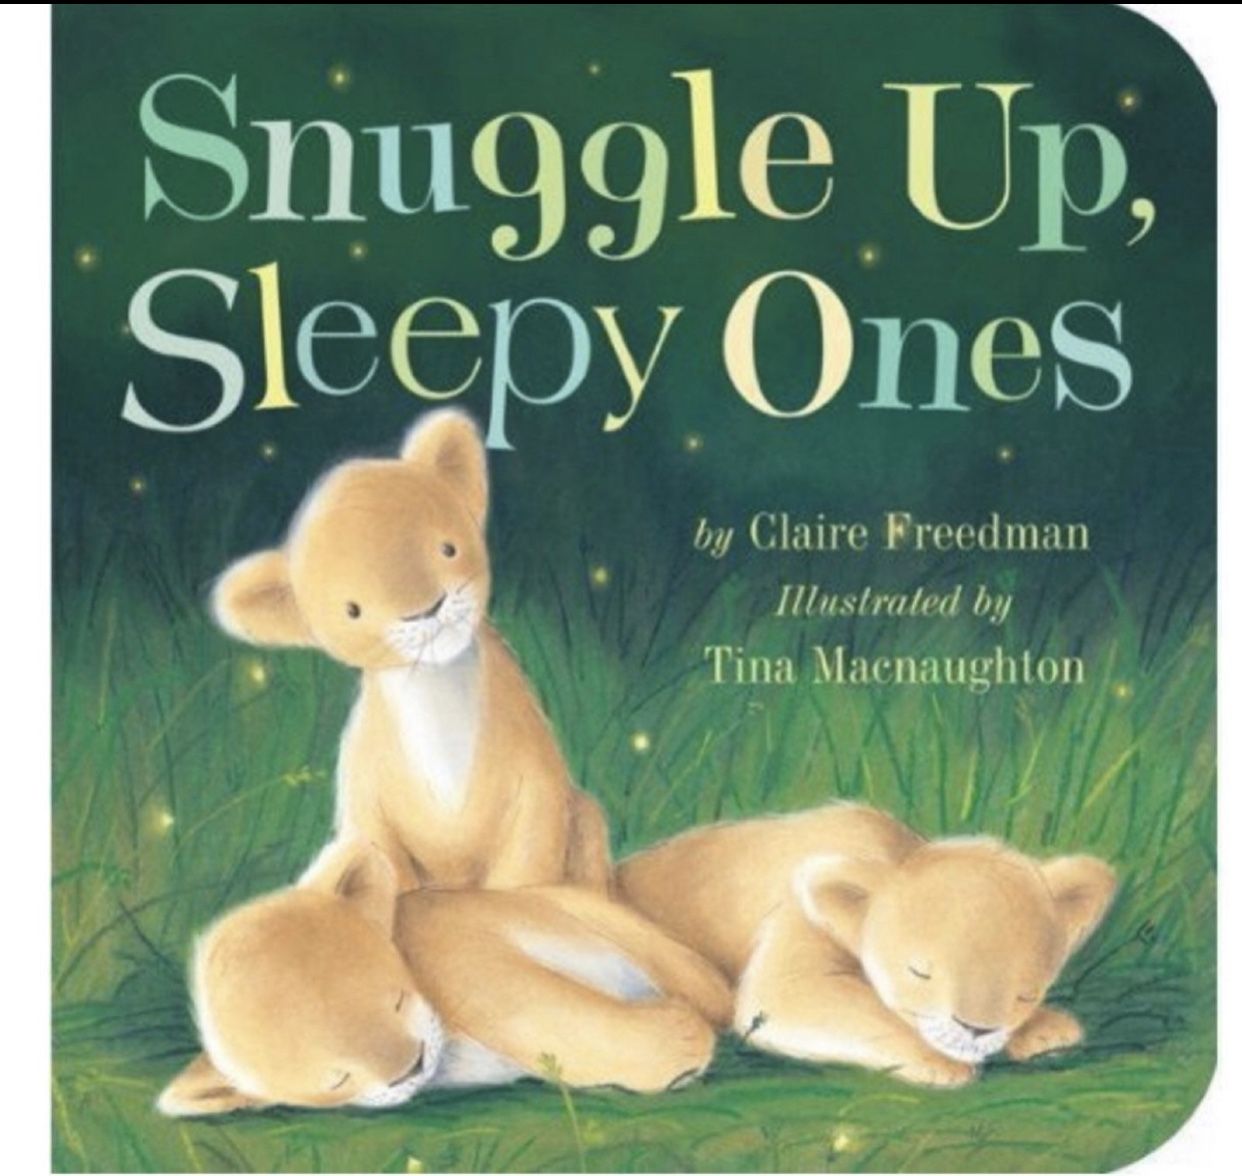 Snuggle Up… Indestructible Safety Ed. Children’s Book